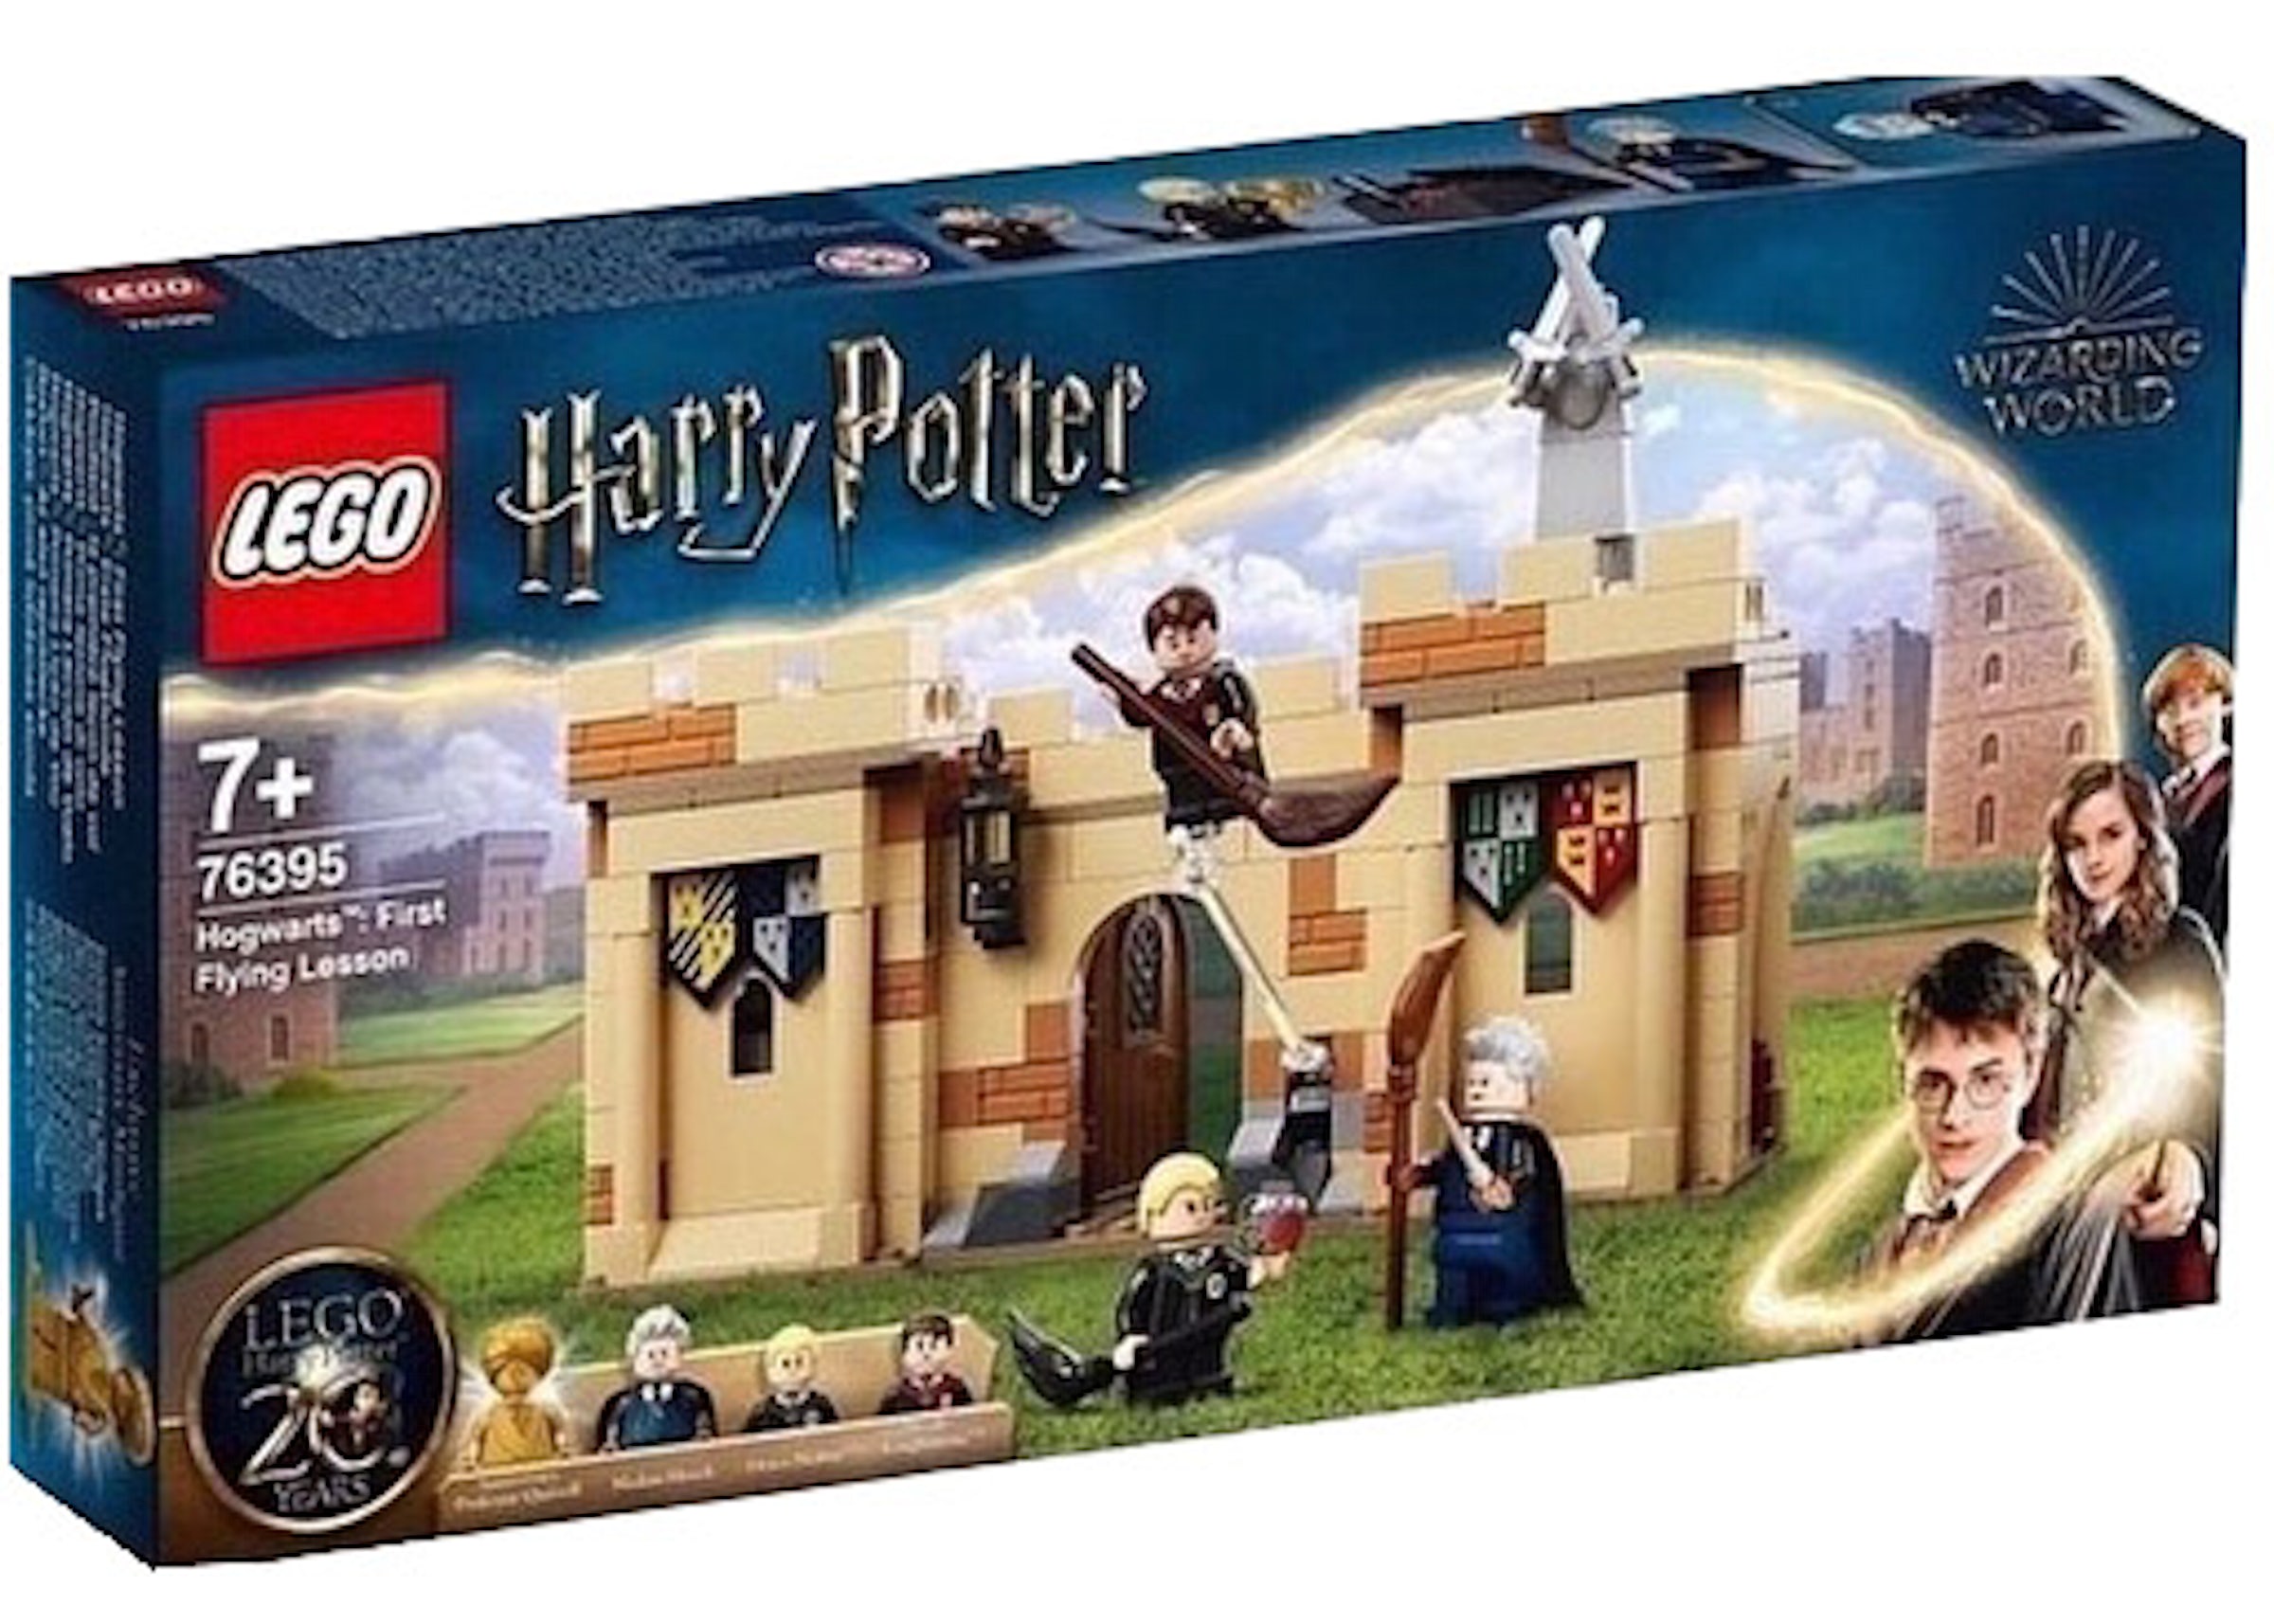 LEGO Harry Potter - Buy & Sell Collectibles.